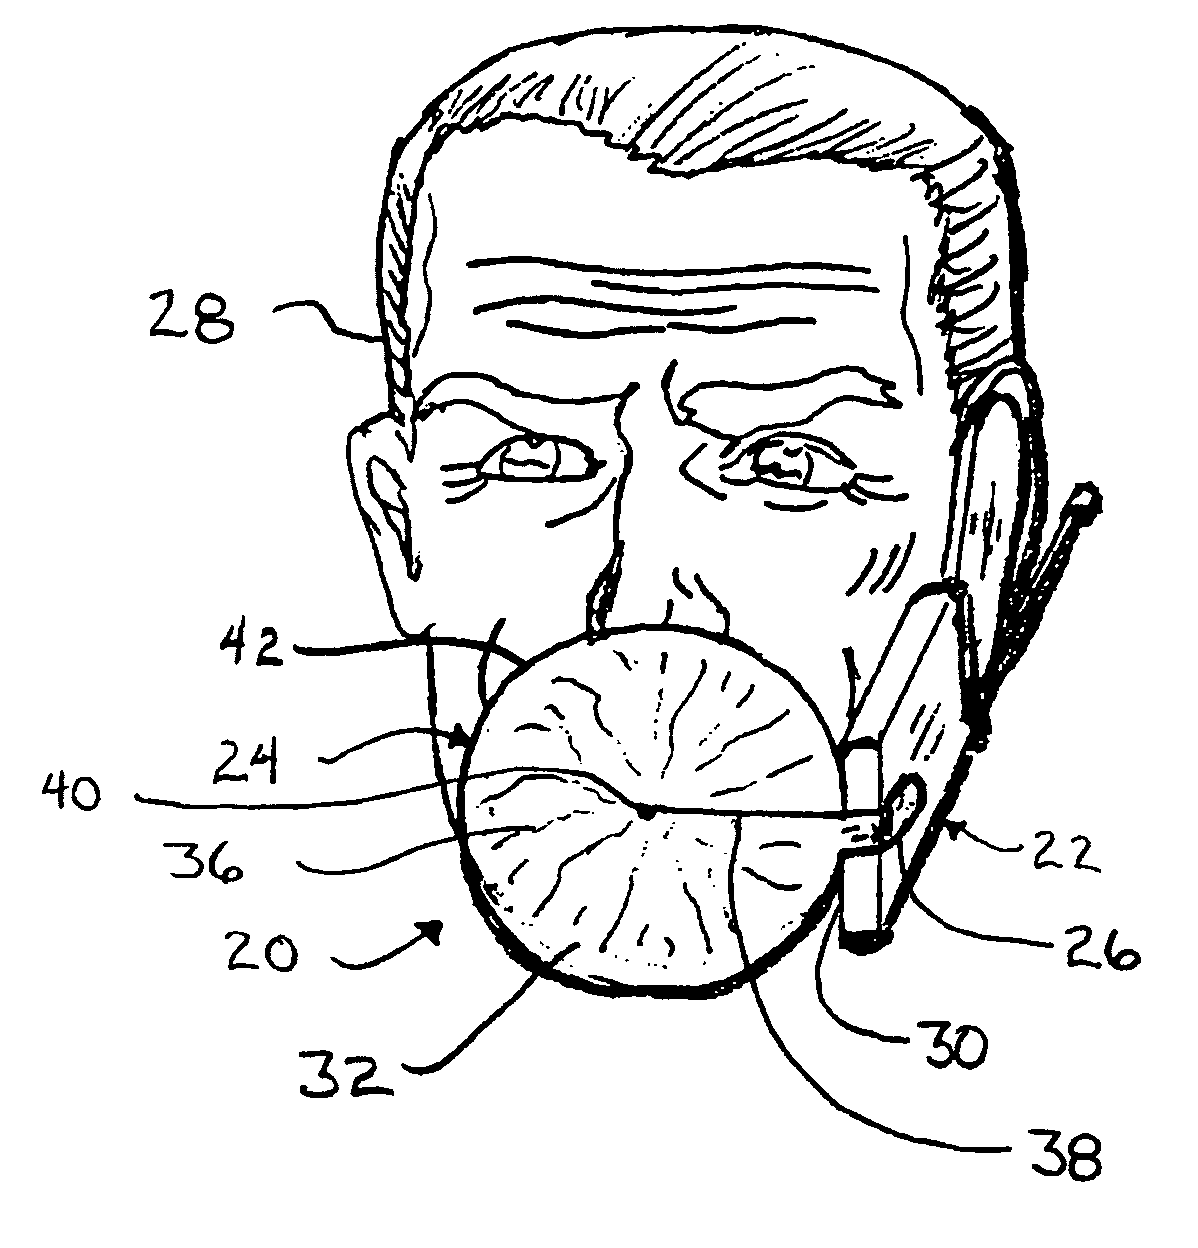 Voice absorber for portable telephonic devices